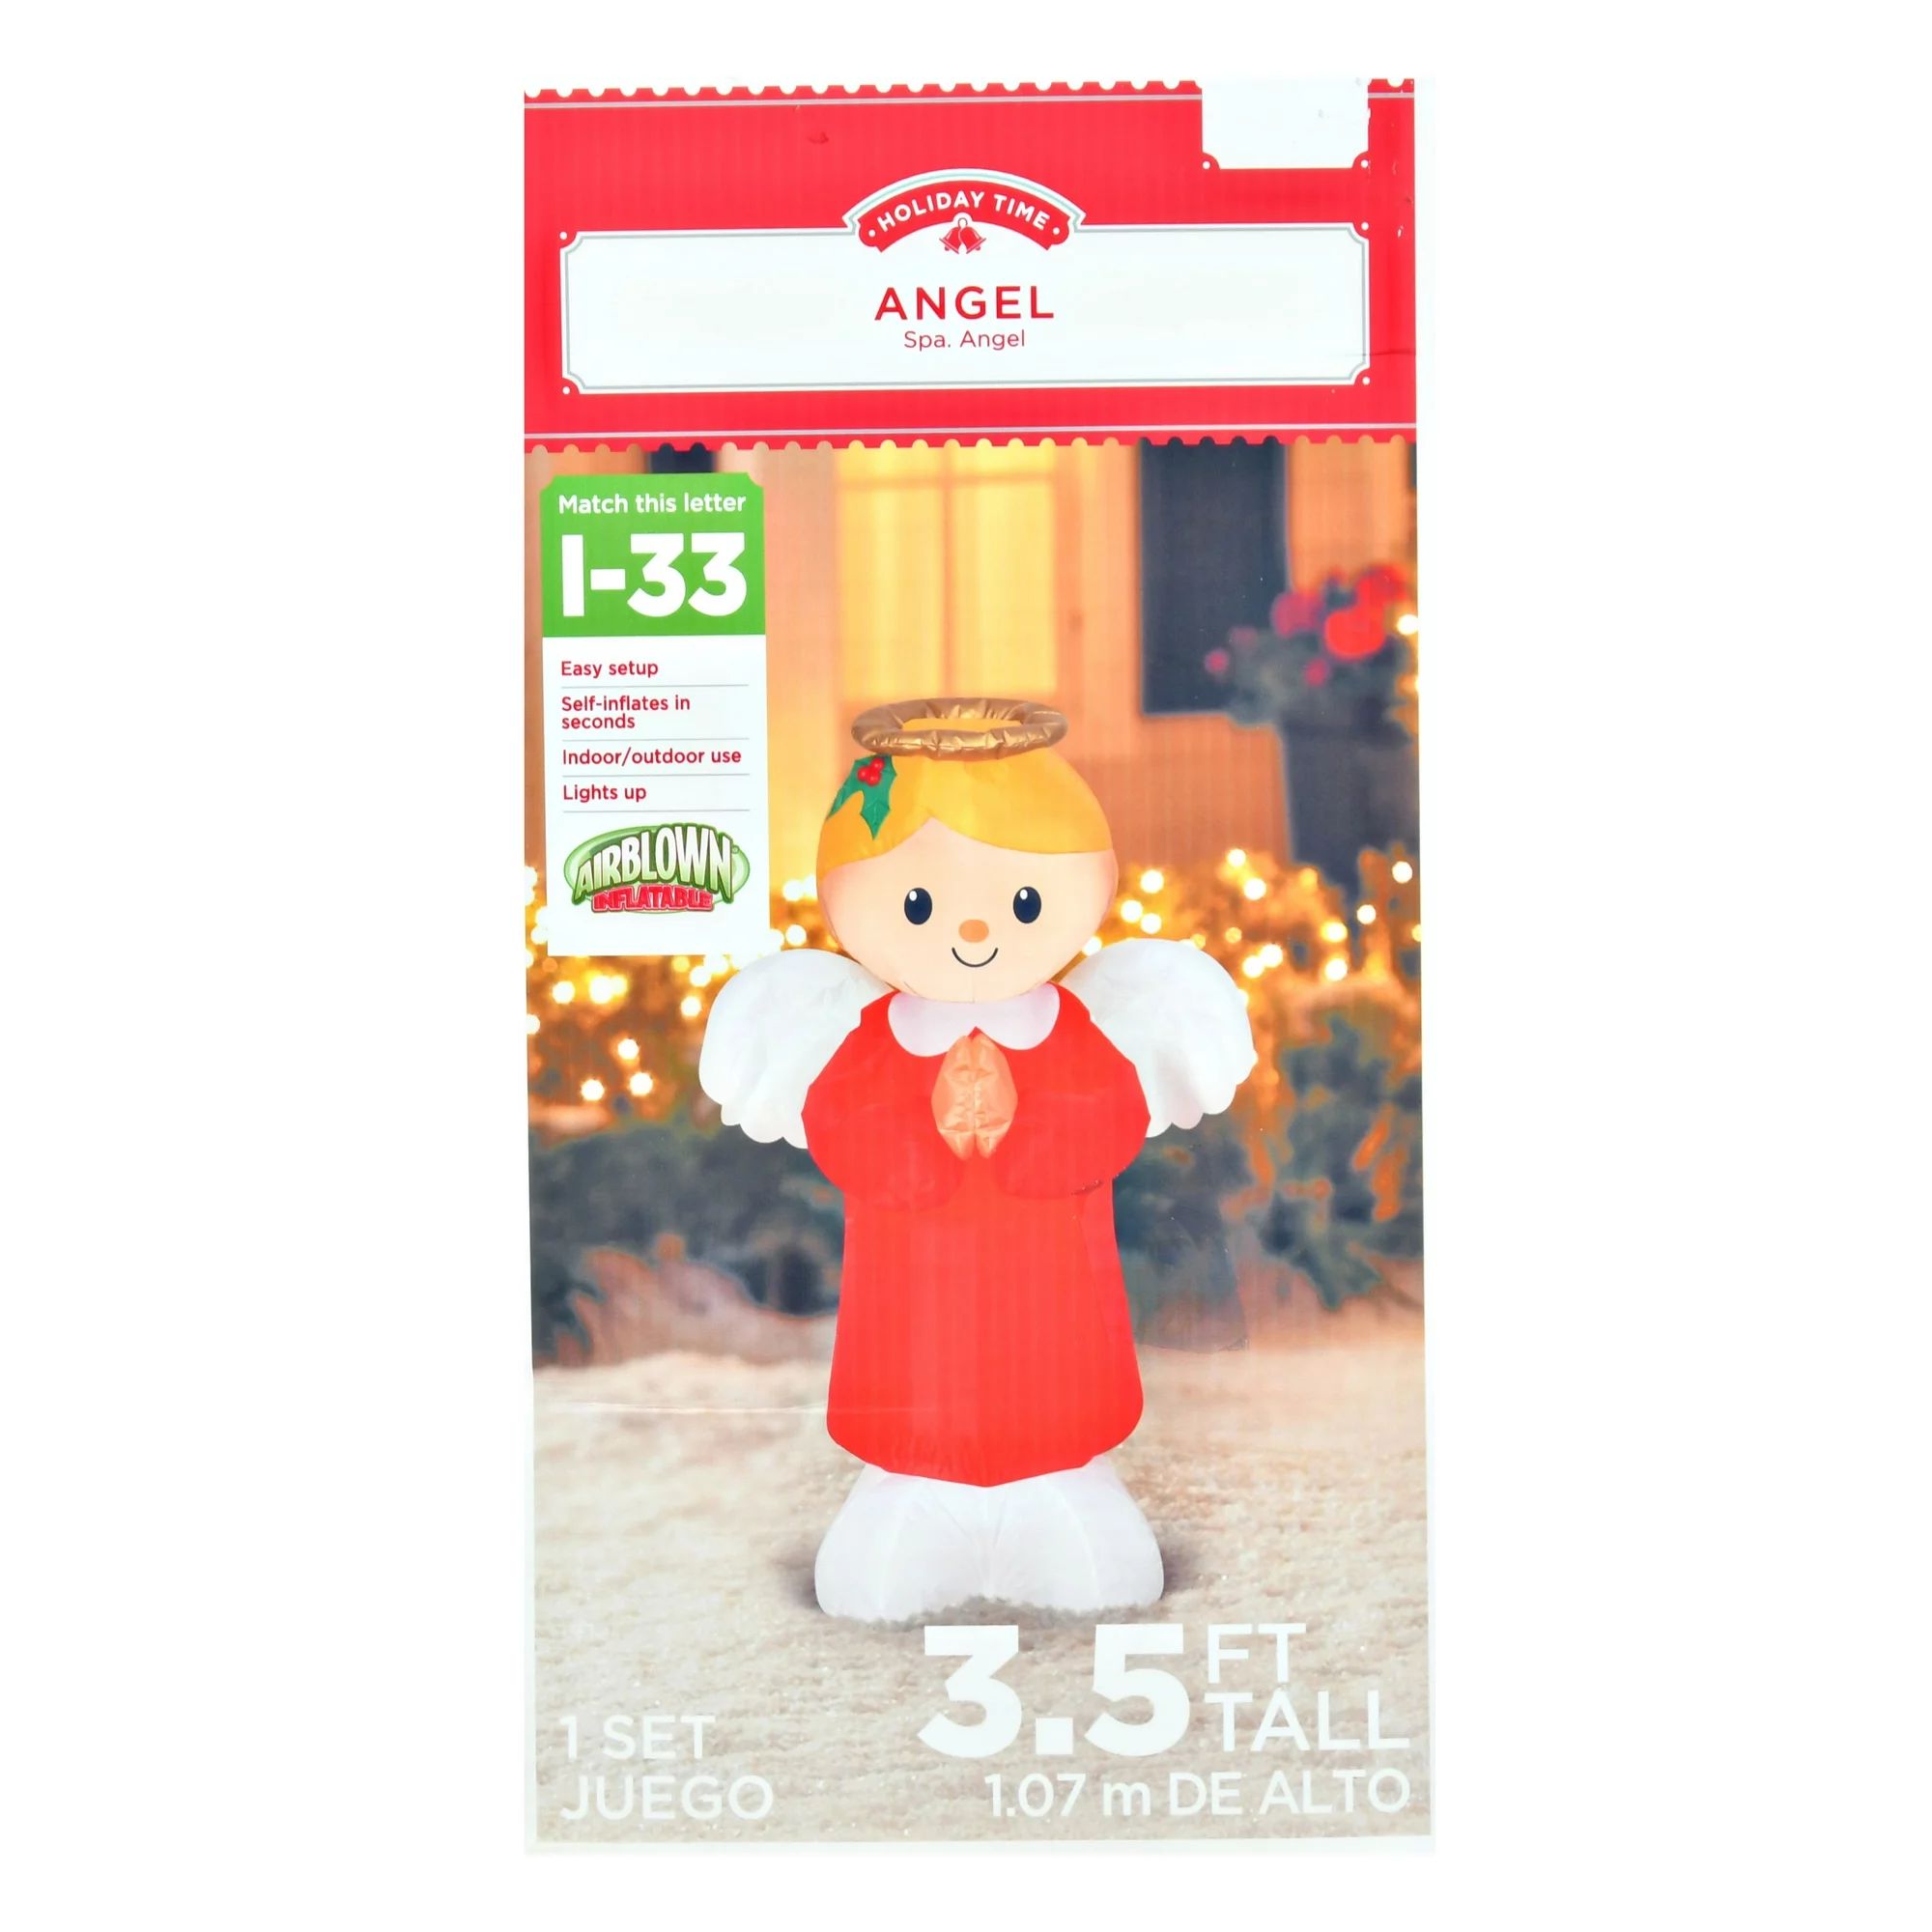 Holiday Time Angel Inflatable 3.5 ft tall by Gemmy Industries | Walmart (US)